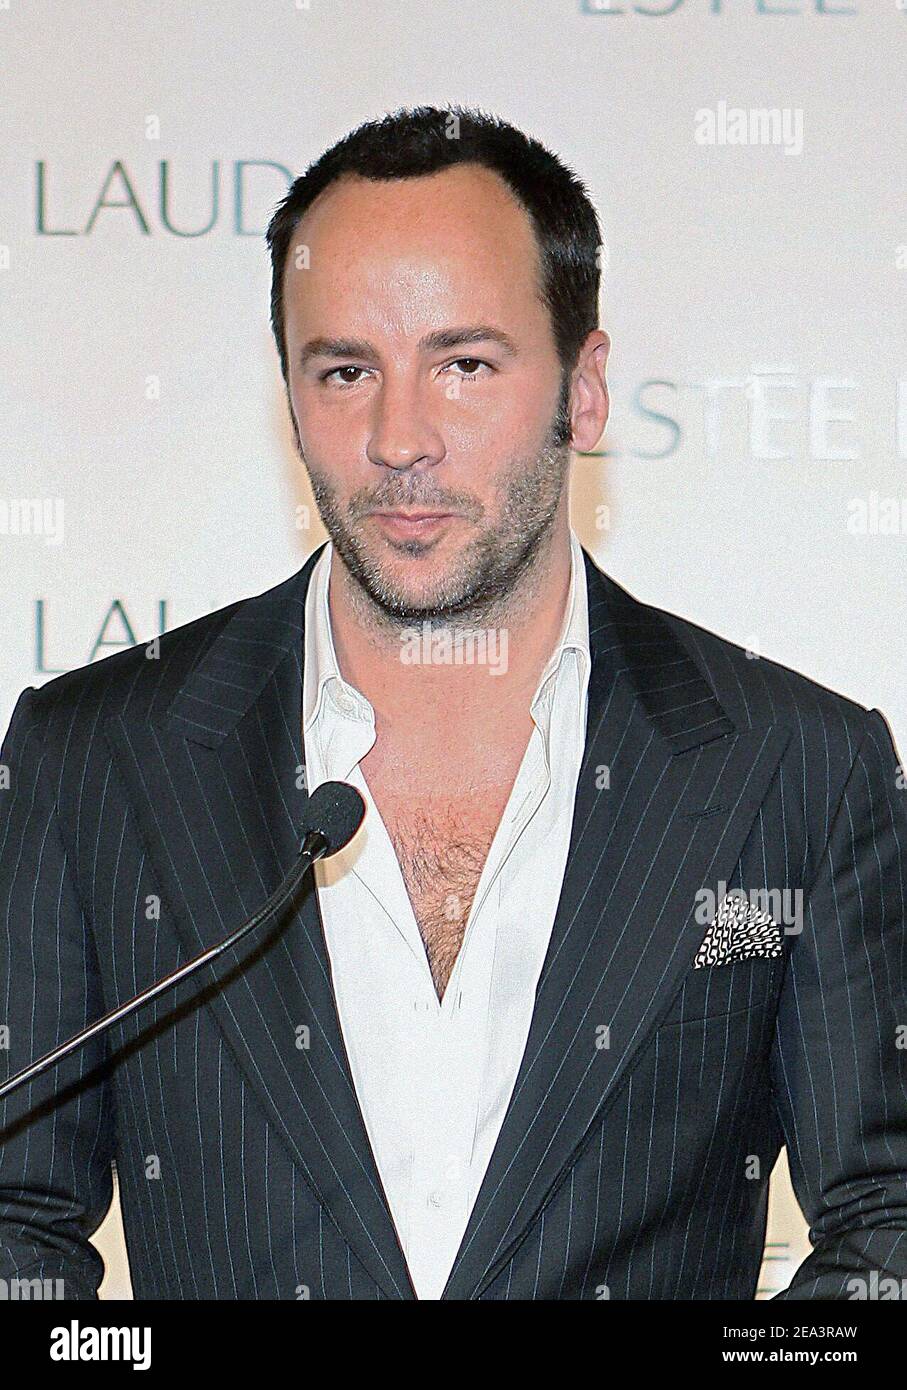 U.S. fashion designer Tom Ford during a press conference to announce he  will join cosmetics giant Estee Lauder to create a new beauty line, in New  York City, NY, USA, on April